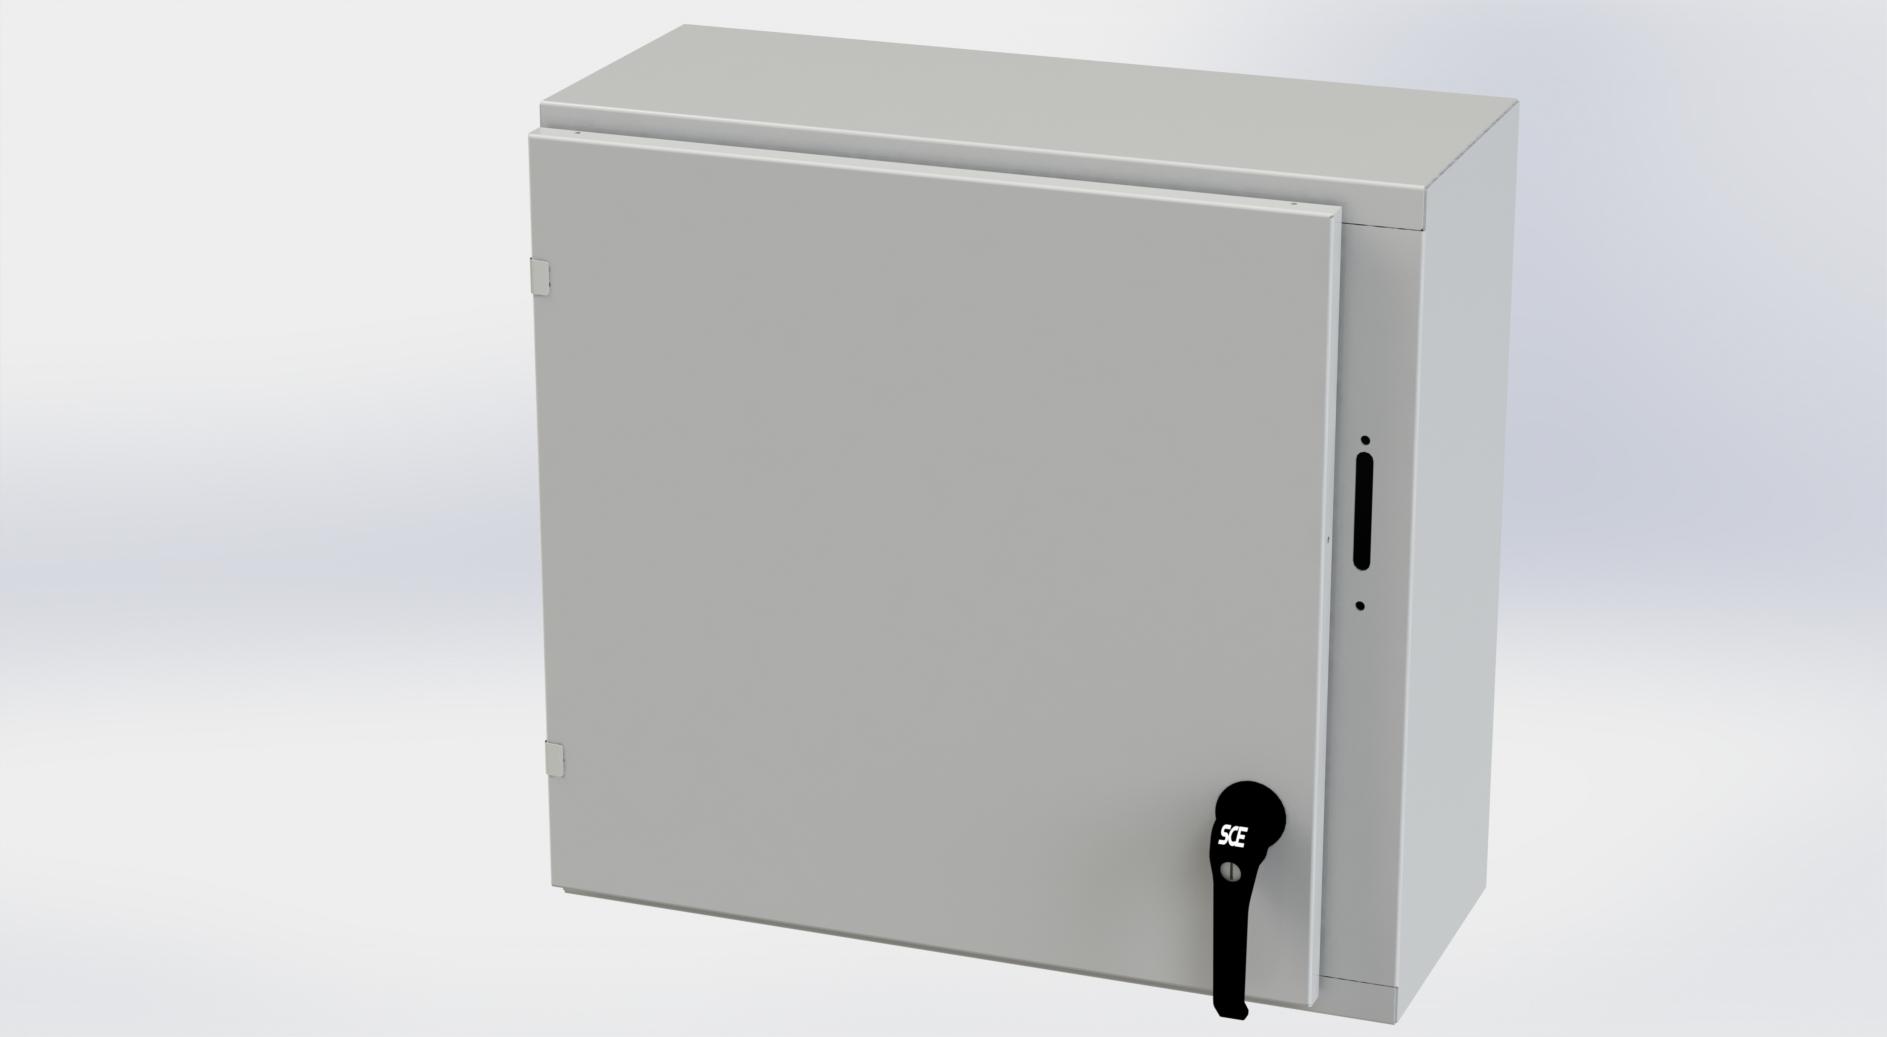 Saginaw Control SCE-24XEL2510LPLG XEL LP Enclosure, Height:24.00", Width:25.38", Depth:10.00", RAL 7035 gray powder coating inside and out. Optional sub-panels are powder coated white.